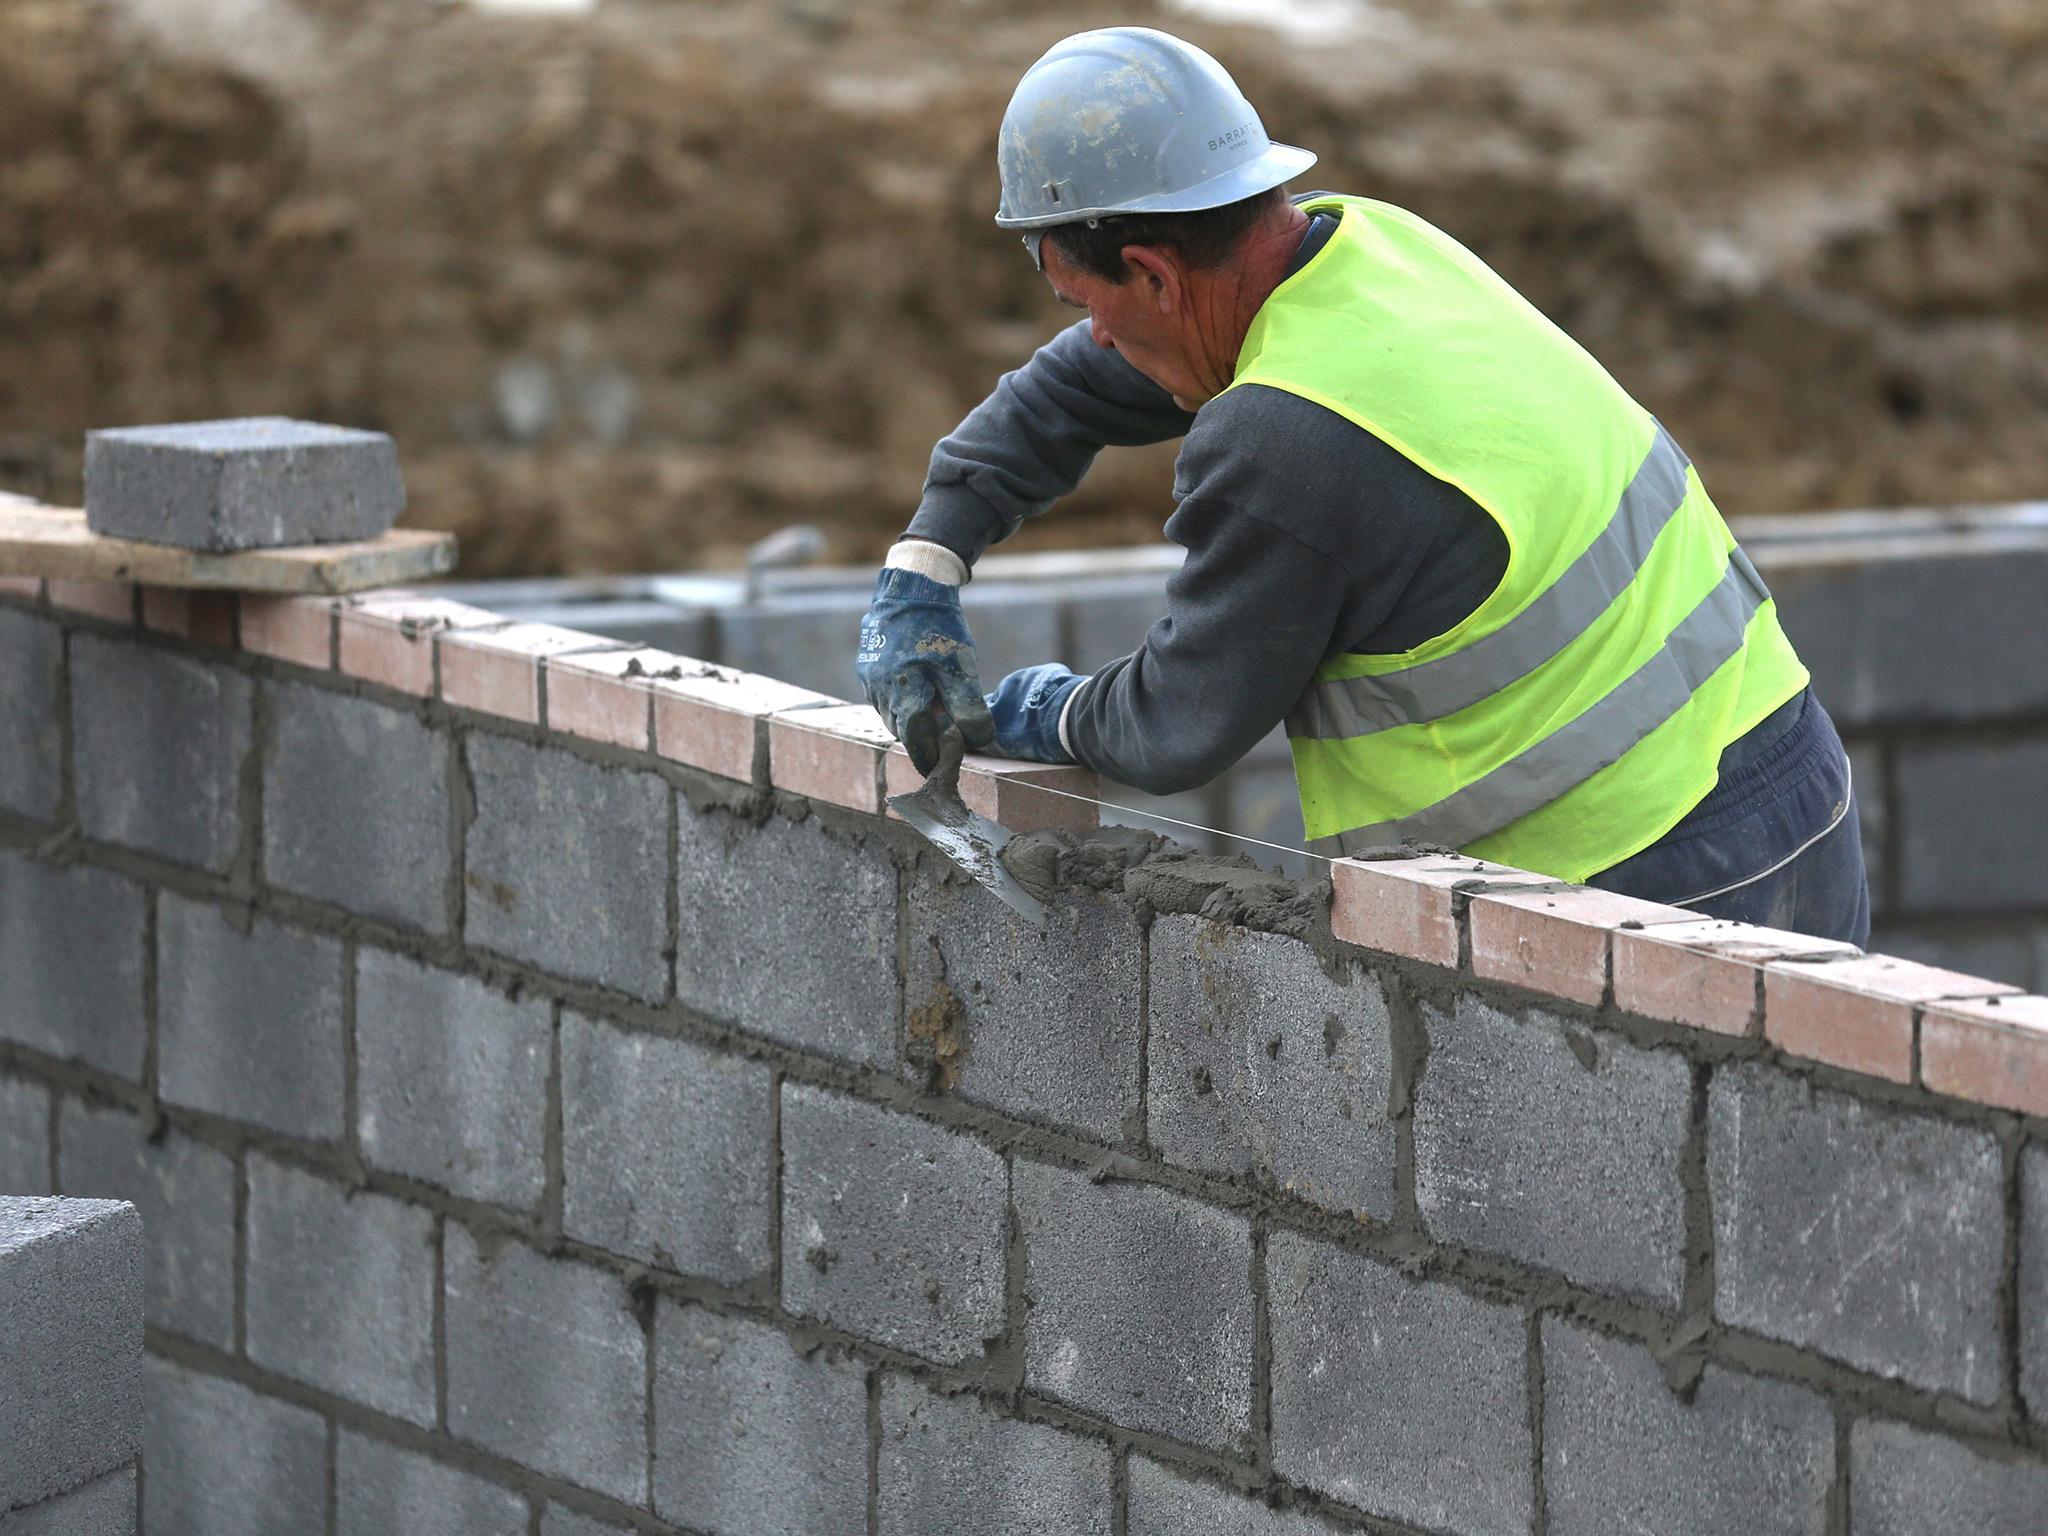 Housebuilding is already off-target